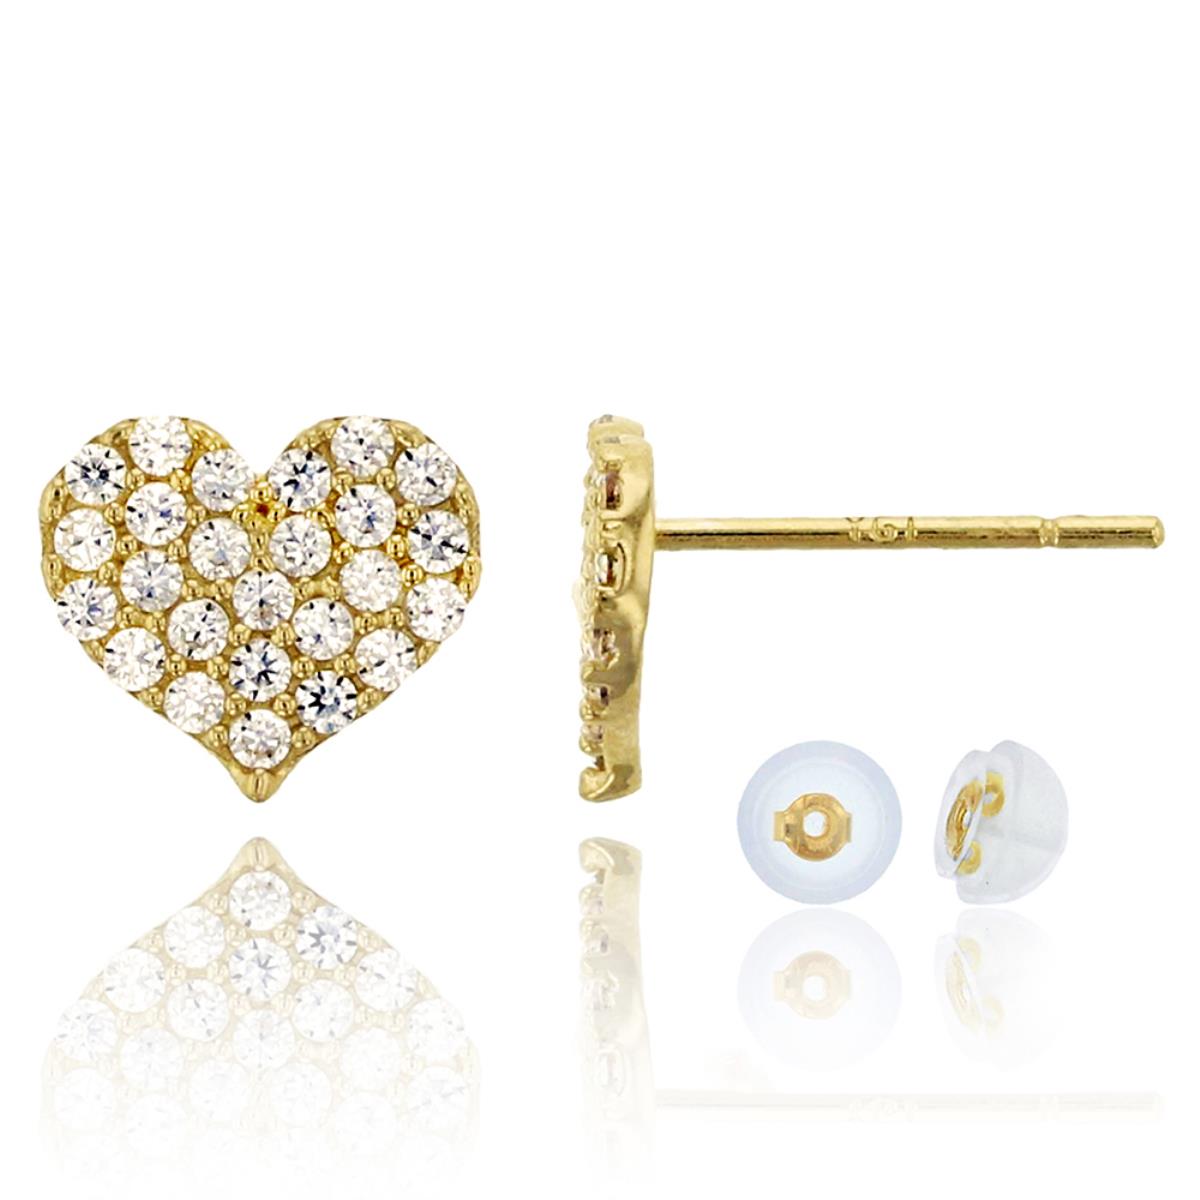 10K Yellow Gold Micropave Heart CZ Stud Earrings with Bubble Silicone Backs